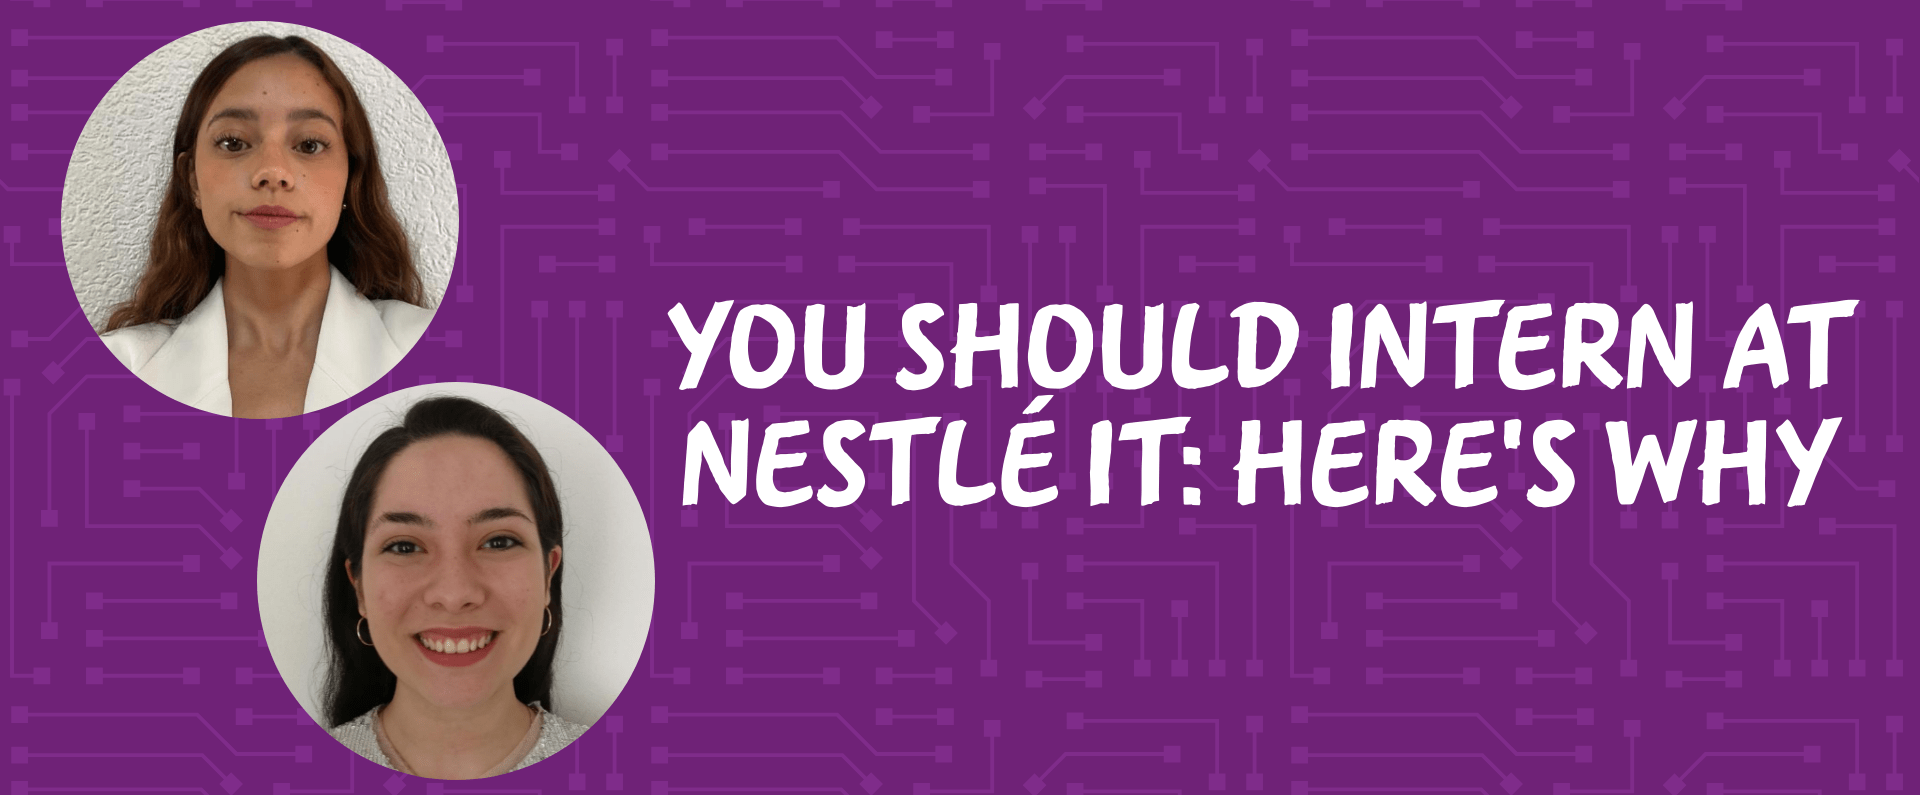 You should intern at Nestle IT, here's why